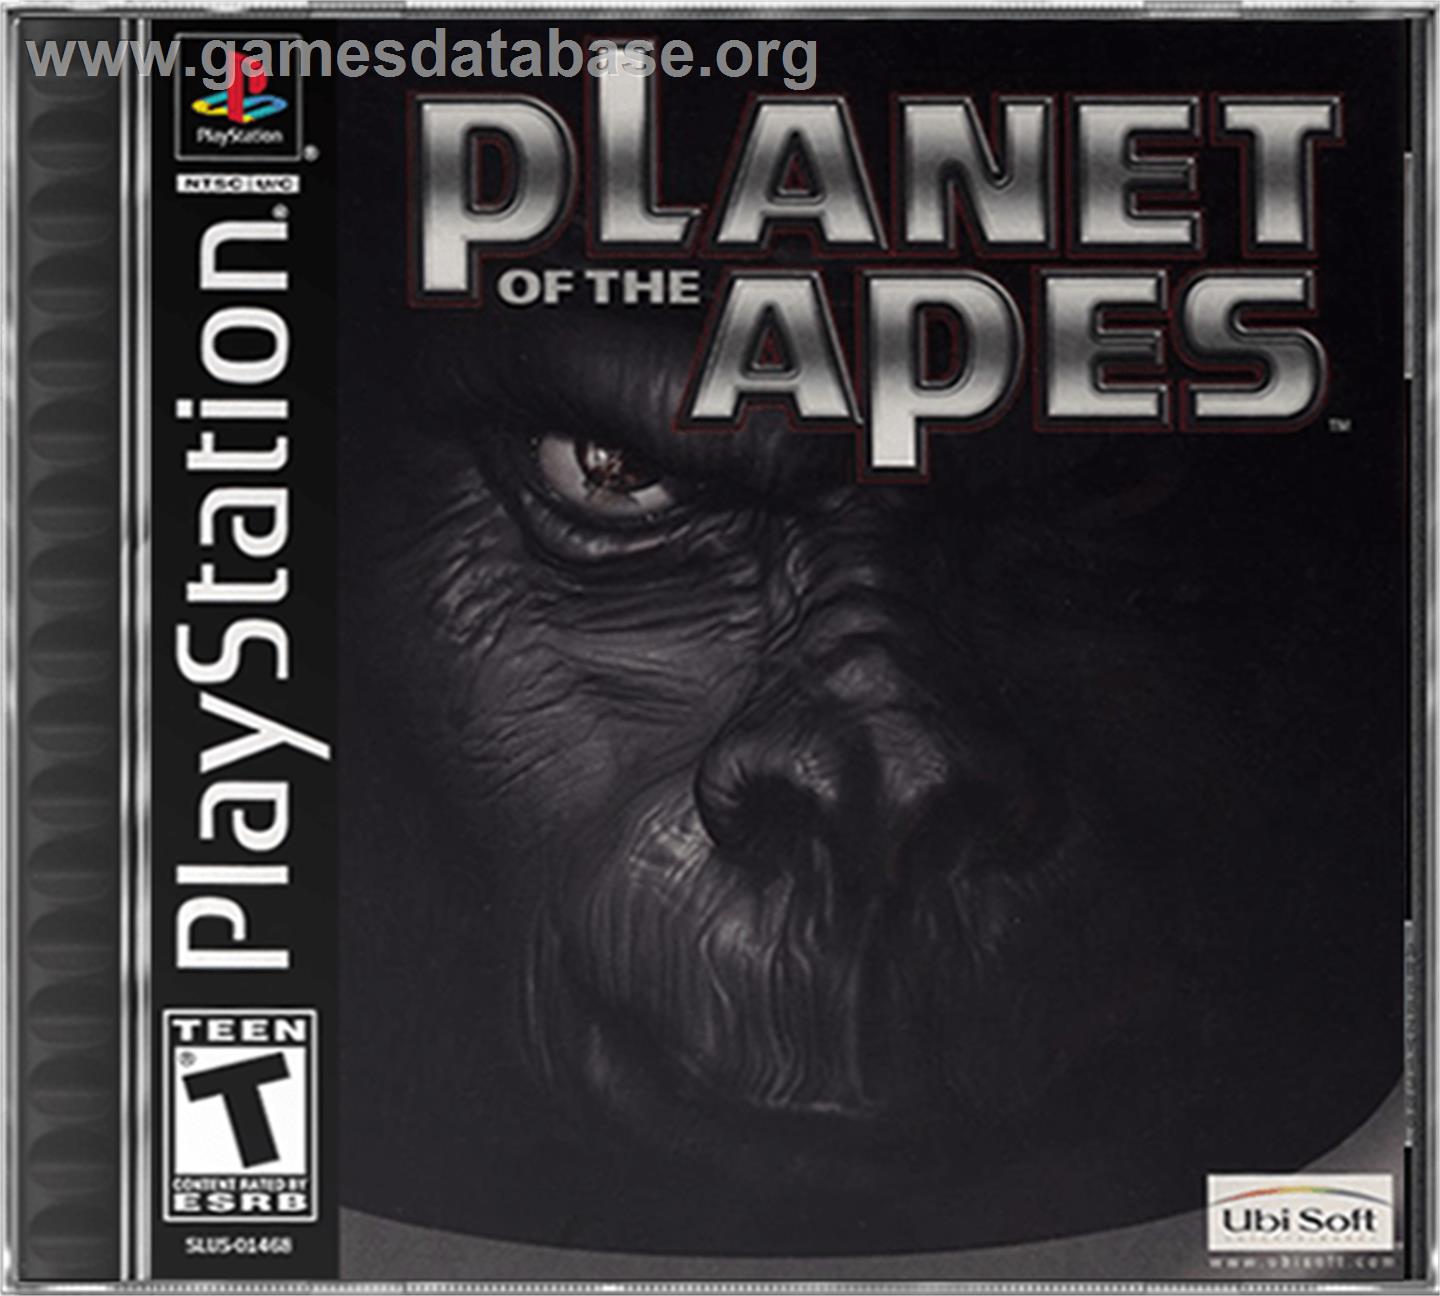 Planet of the Apes - Sony Playstation - Artwork - Box